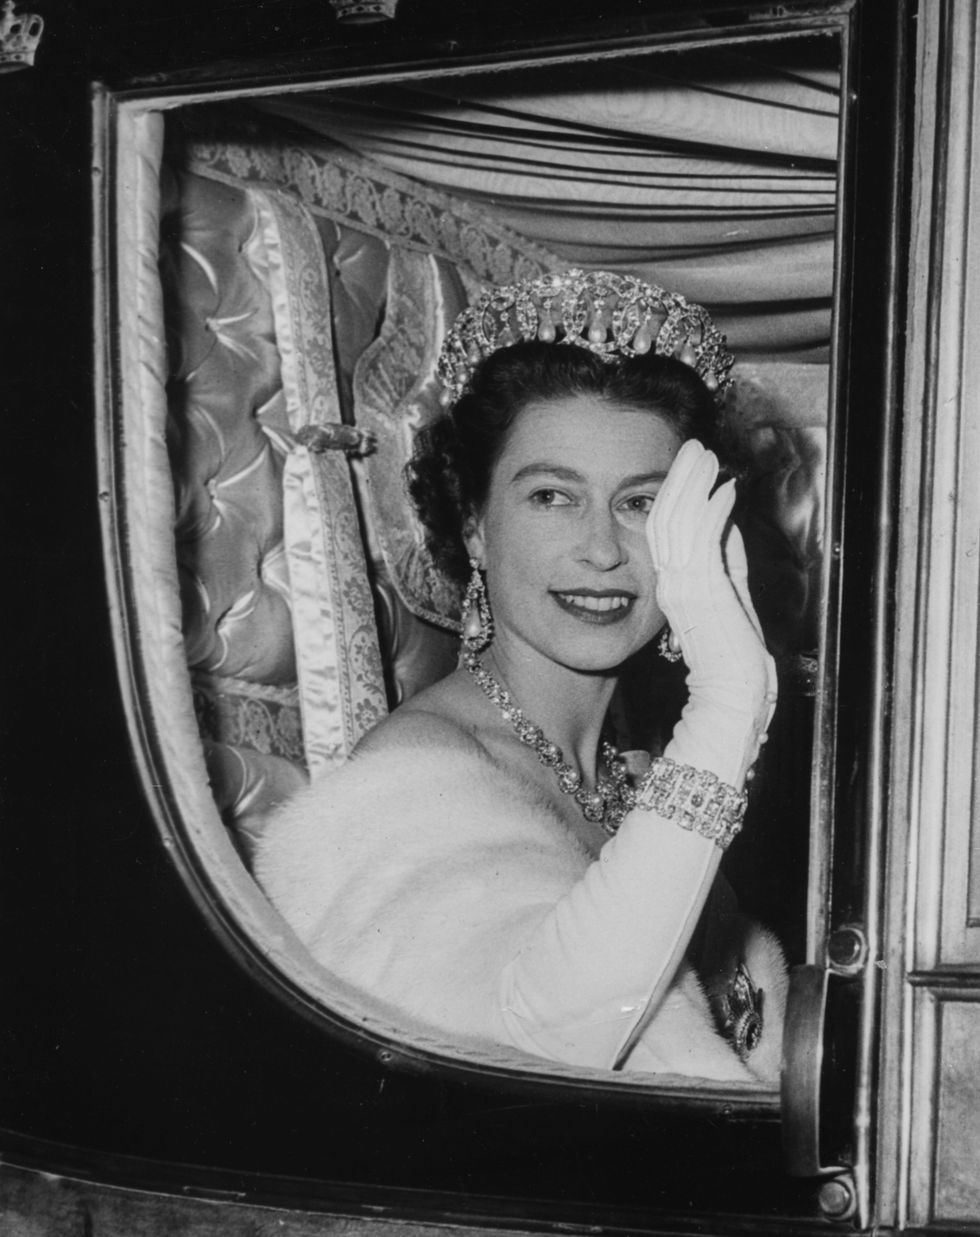 <p>Her Majesty posed in a diamond tiara and jewels while visiting Copenhagen in 1957.</p>